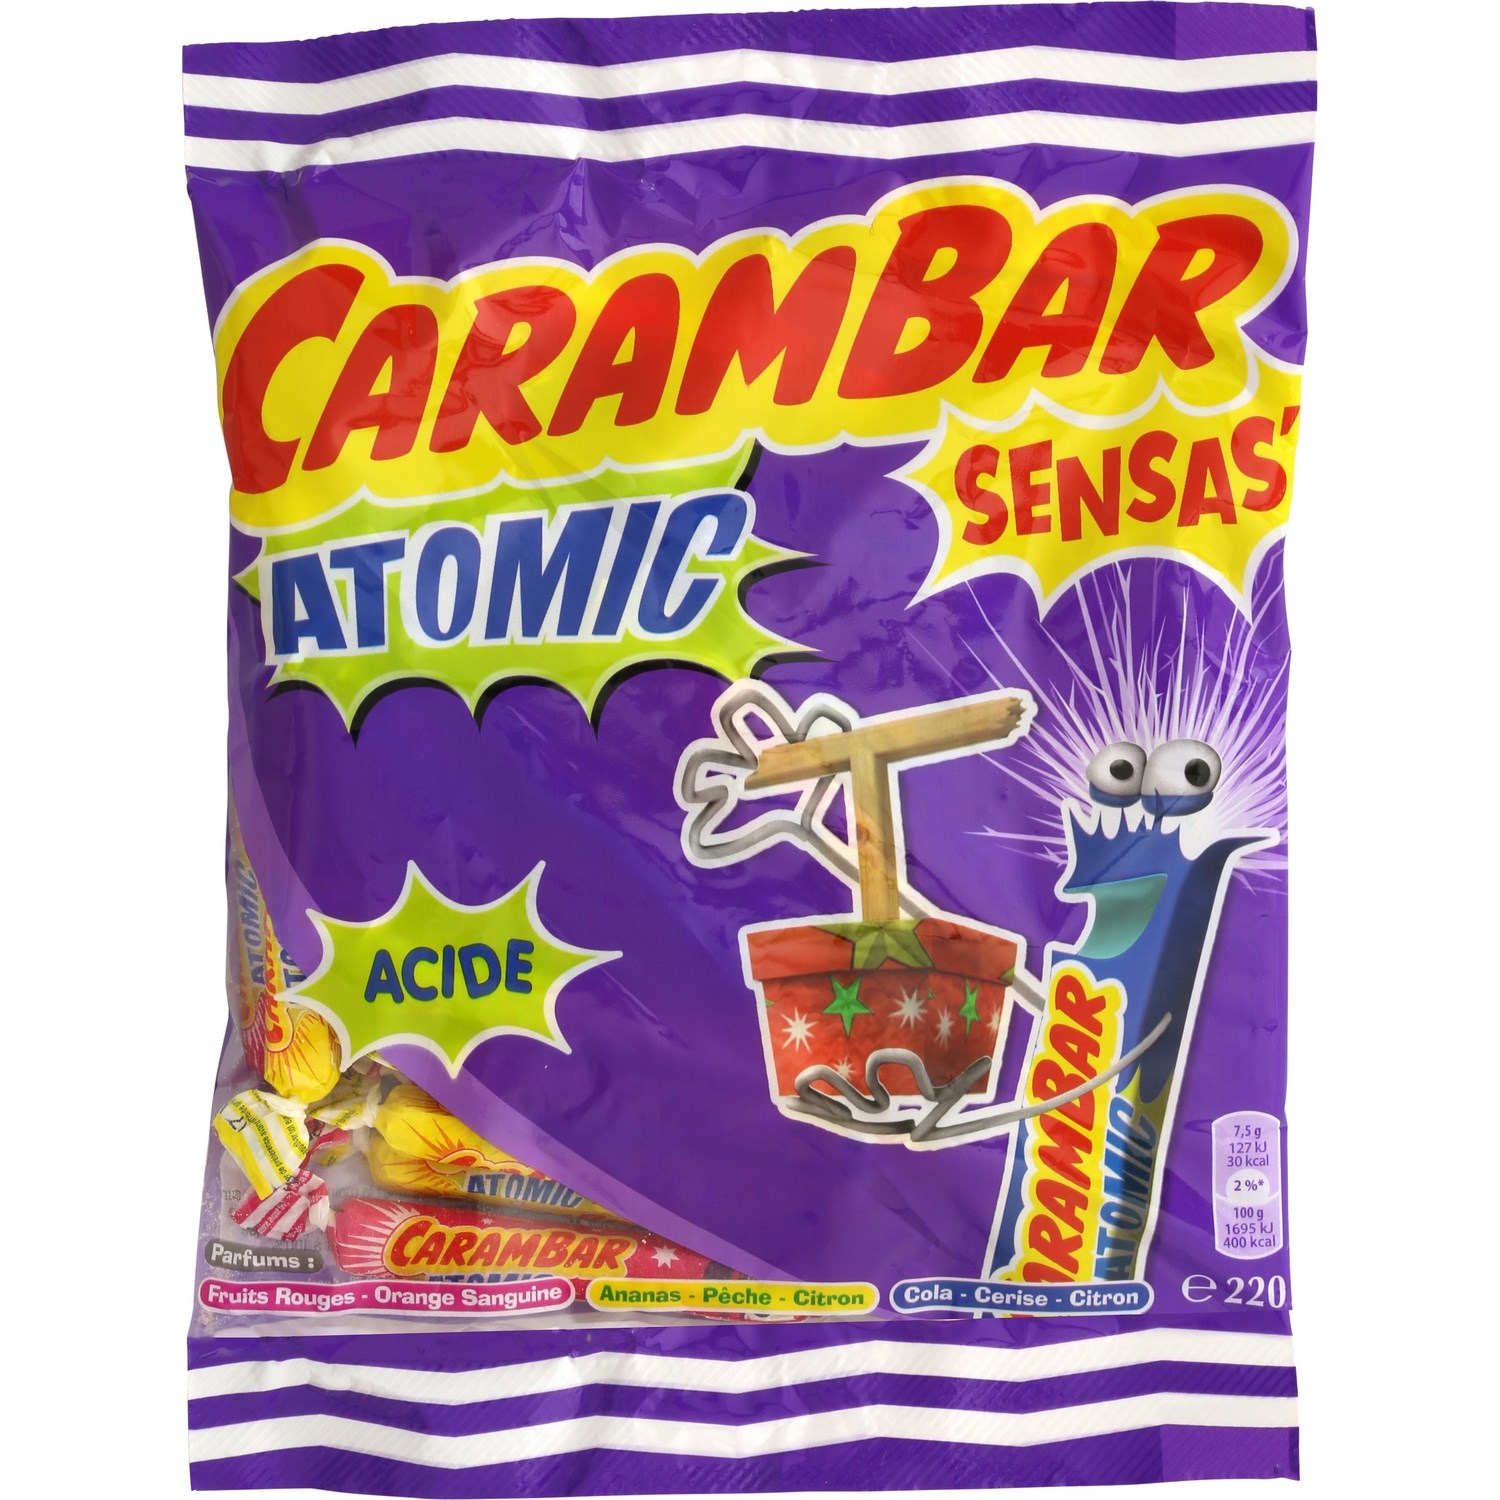 NEW 1 X Carambar Atomic Sweets - 220g French Chewy India